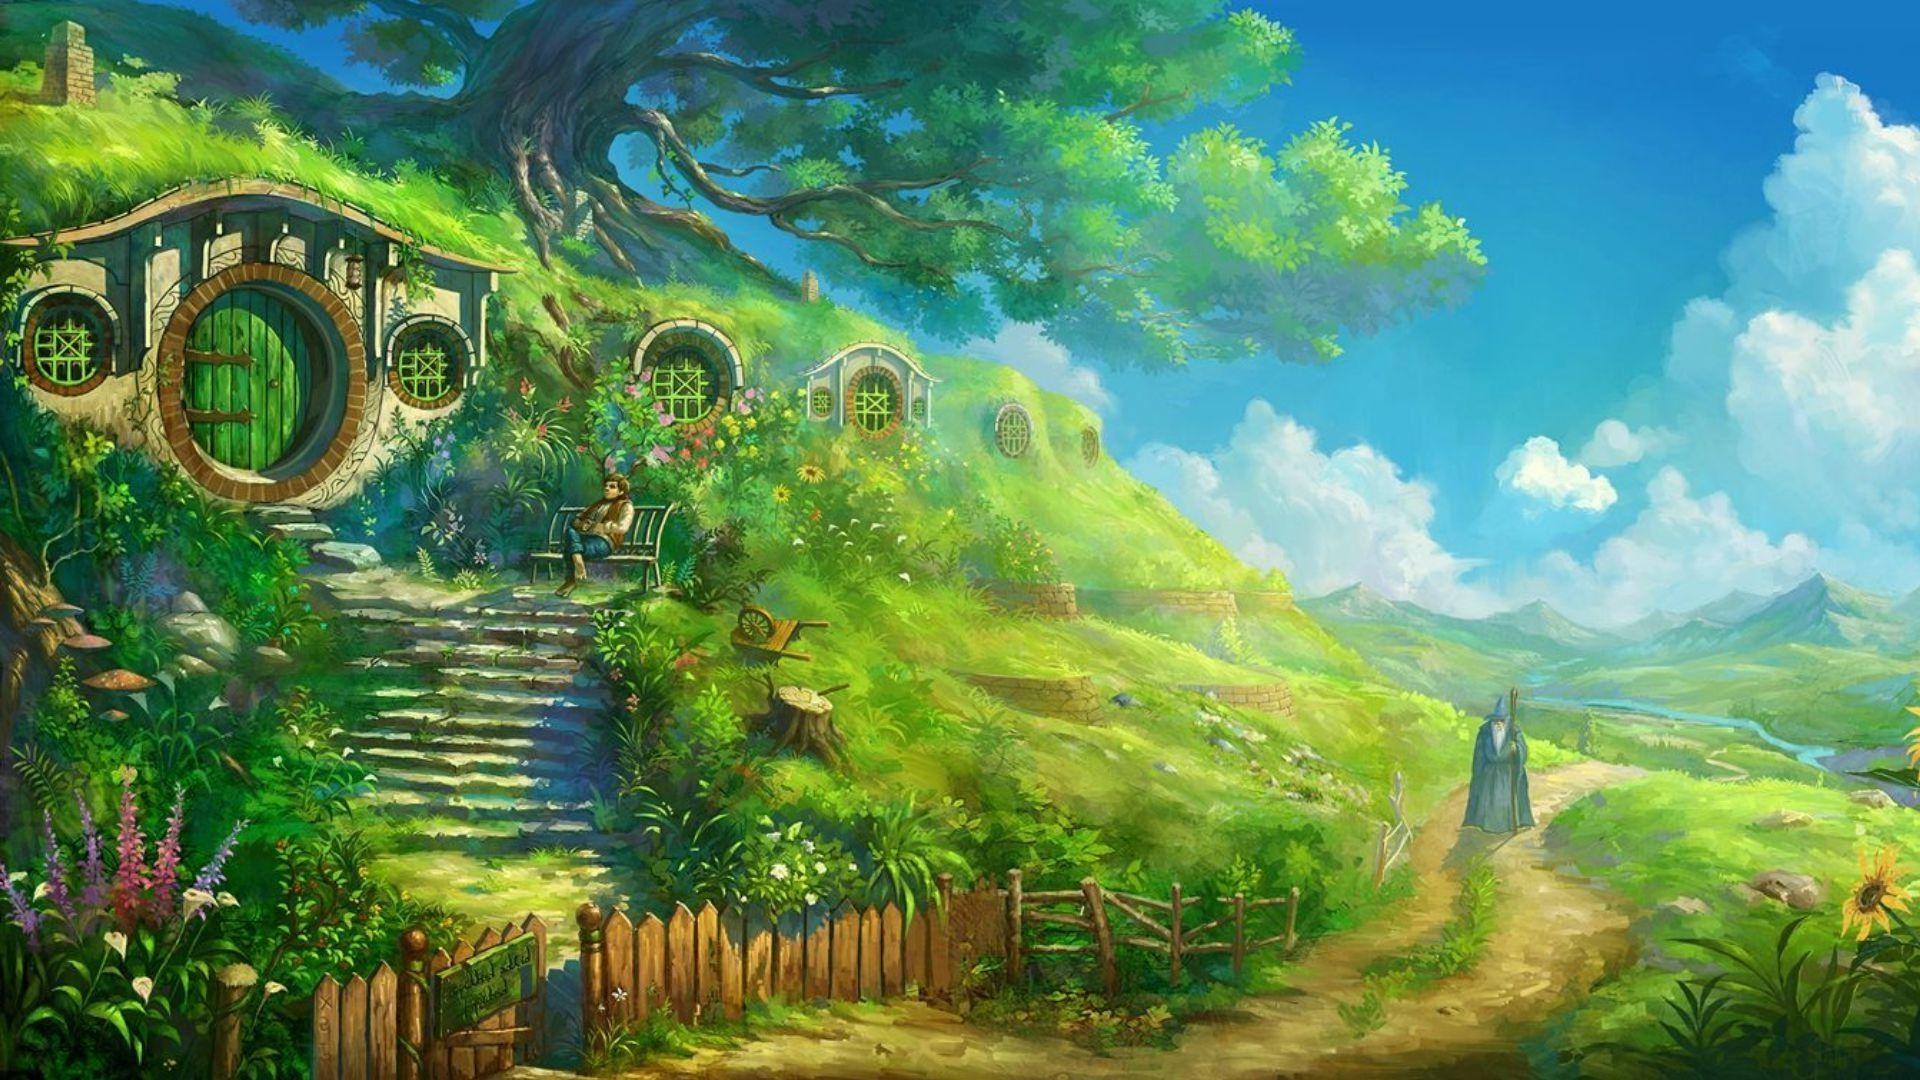 The Shire Wallpaper, HDQ Cover The Shire Wallpaper for Free, Pics